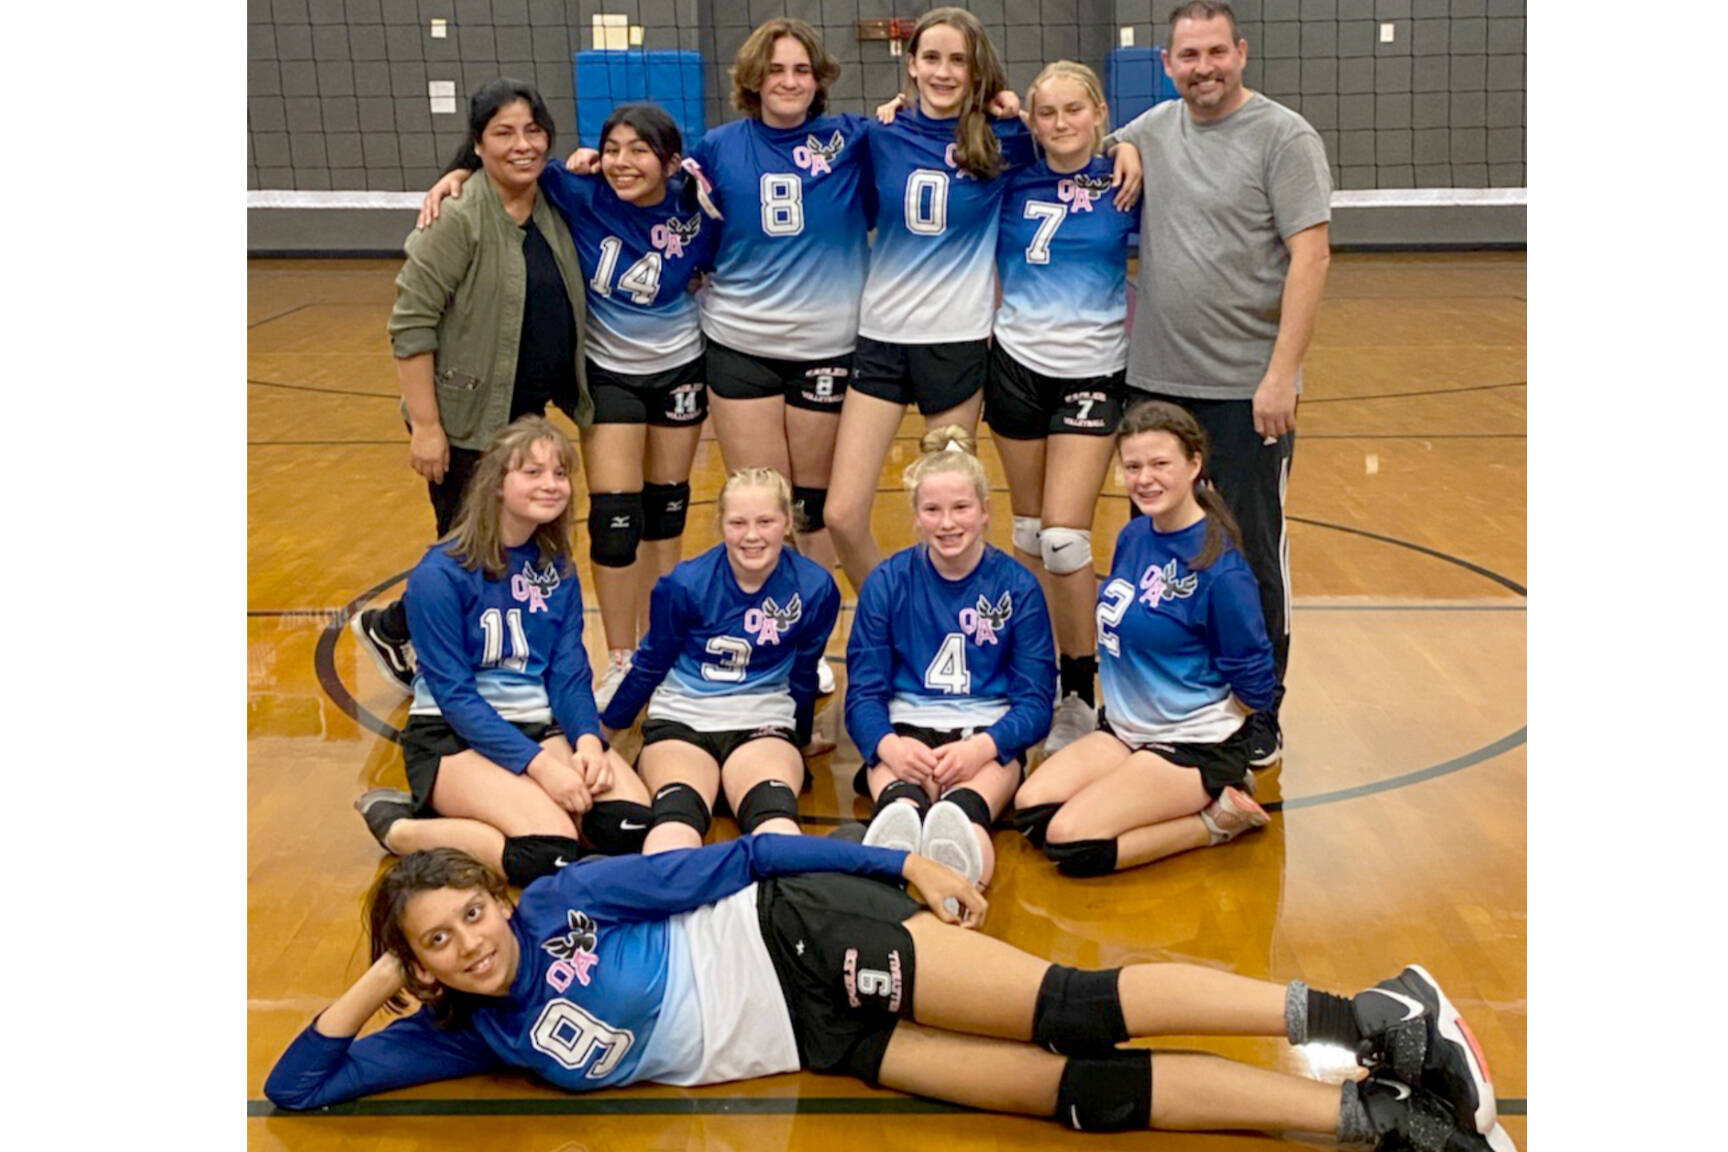 Courtesy photo
The Queen of Angels volleyball team went 7-3 in its inaugural season. From left, rear, are coach Margarita Lee, Kassi Montero-Lee, Helen Fishman, Ella Desser, Keira Headrick and coach Bill Lee. From left, middle, are Jocelyn Kimball, Peyton Smith, Mariah Traband and Ryah DeLeon. In front is Jessica Rodriguez.